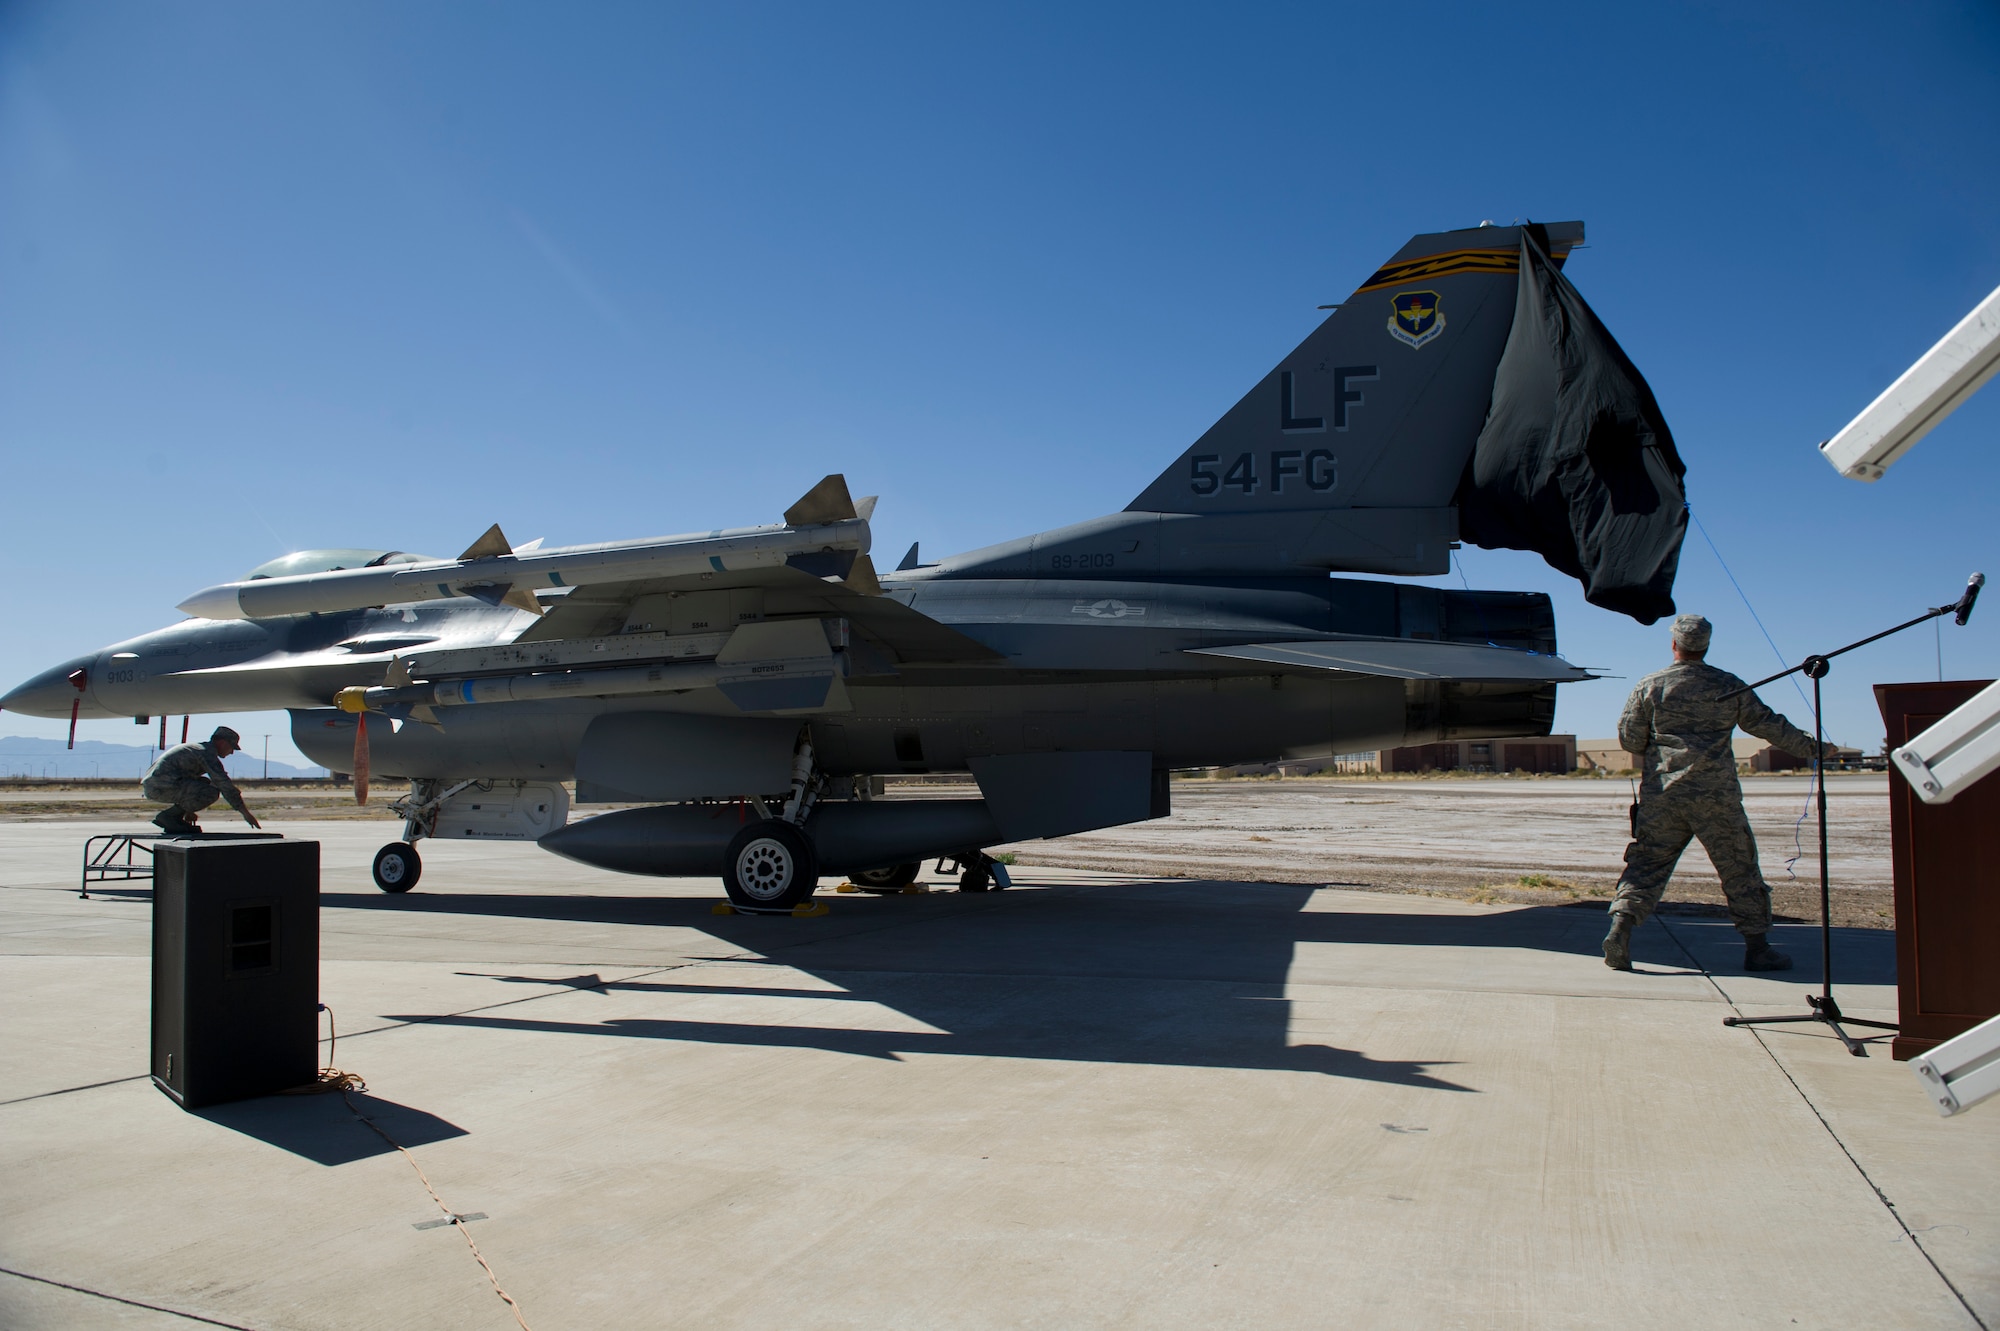 An F-16 Fighting Falcon donning the 54th Fighter Group tail flash is unveiled for the first time during the 54th Fighter Group activation ceremony at Holloman Air Force Base, N.M., March 11. The 54th Fighter Group, a tenant unit at Holloman, is a detachment the 56th Fighter Wing at Luke Air Force Base, Ariz., and will ultimately operate two F-16 Fighting Falcon aircraft training squadrons. The 54th Fighter Group plus three squadrons were activated at the ceremony: the 311th Fighter Squadron, the 54th Operations Support Squadron and the 54th Aircraft Maintenance Squadron. (U.S. Air Force photo by Airman 1st Class Chase A. Cannon/Released)